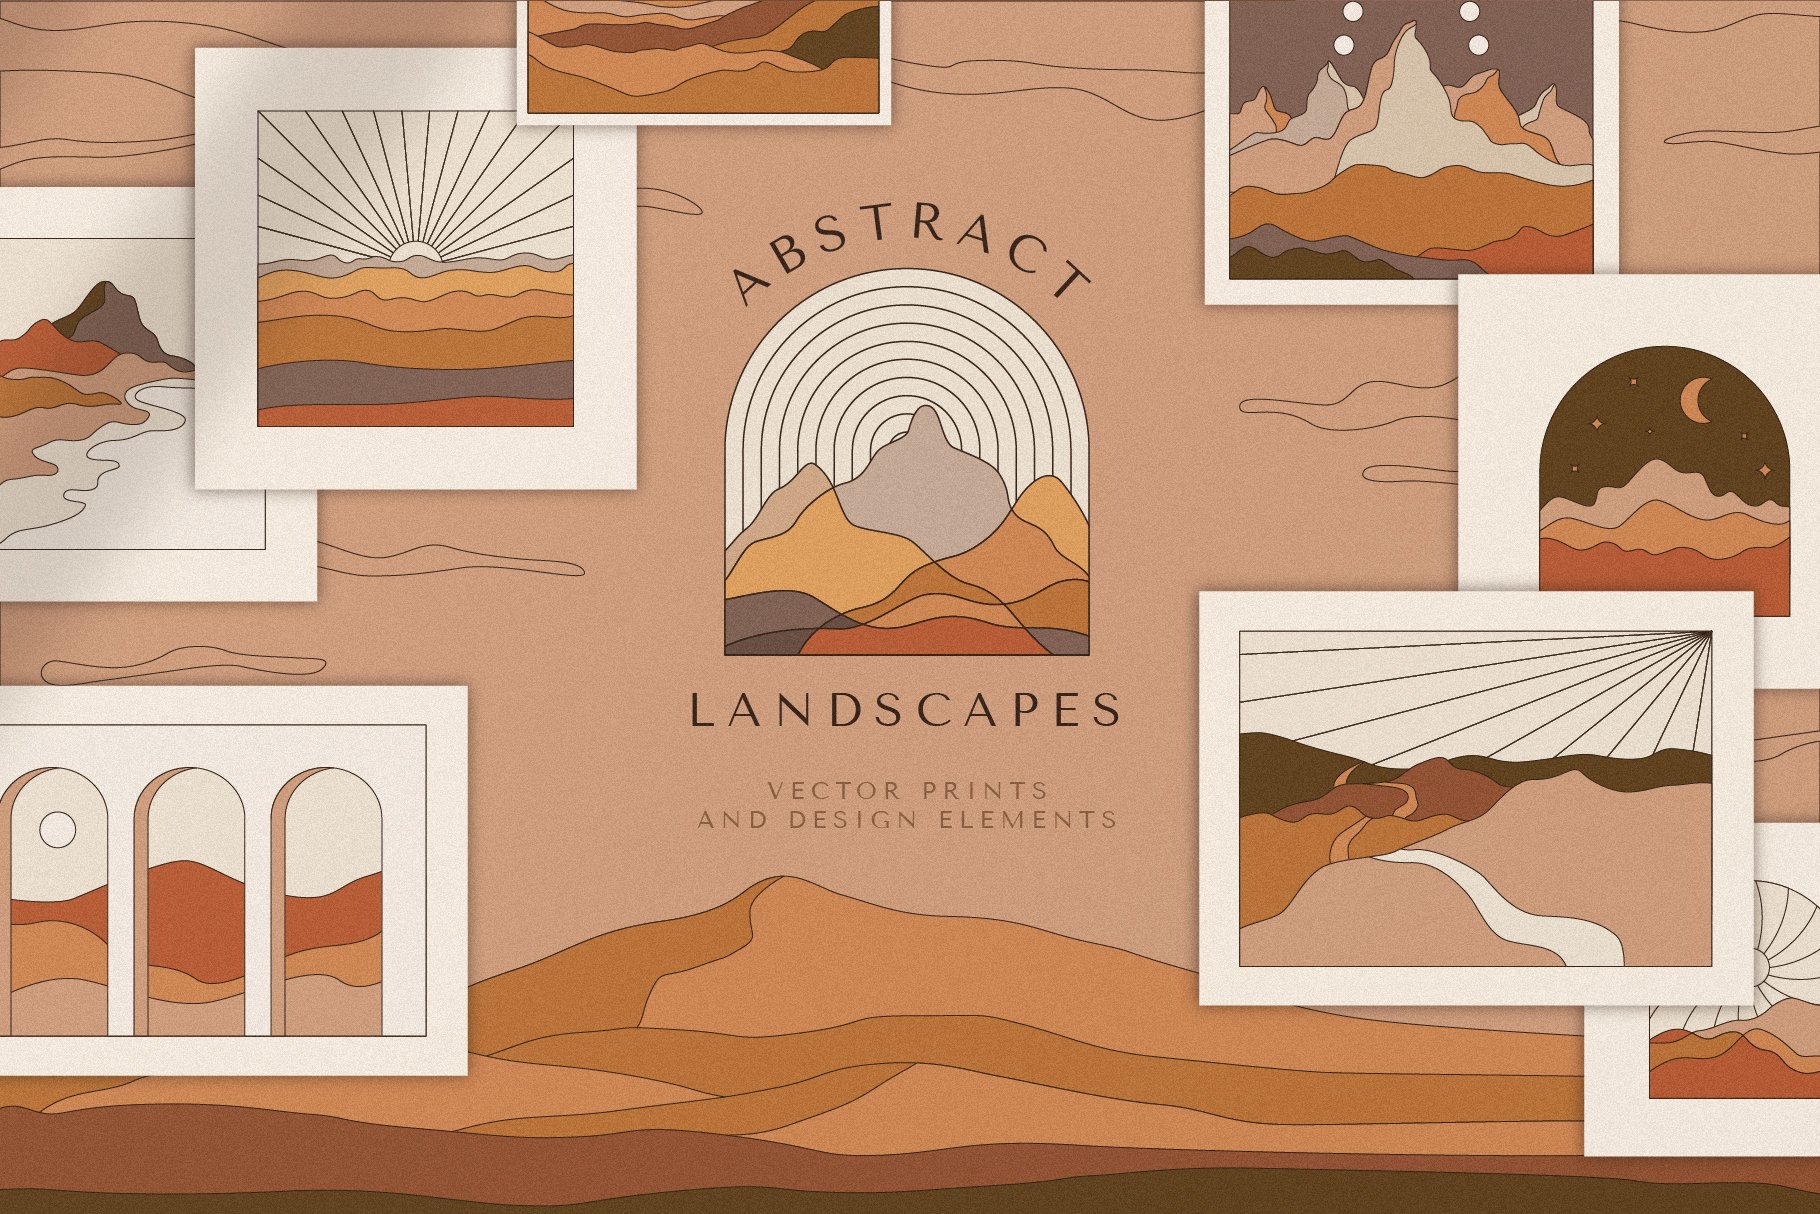 Abstract Boho Landscapes cover image.